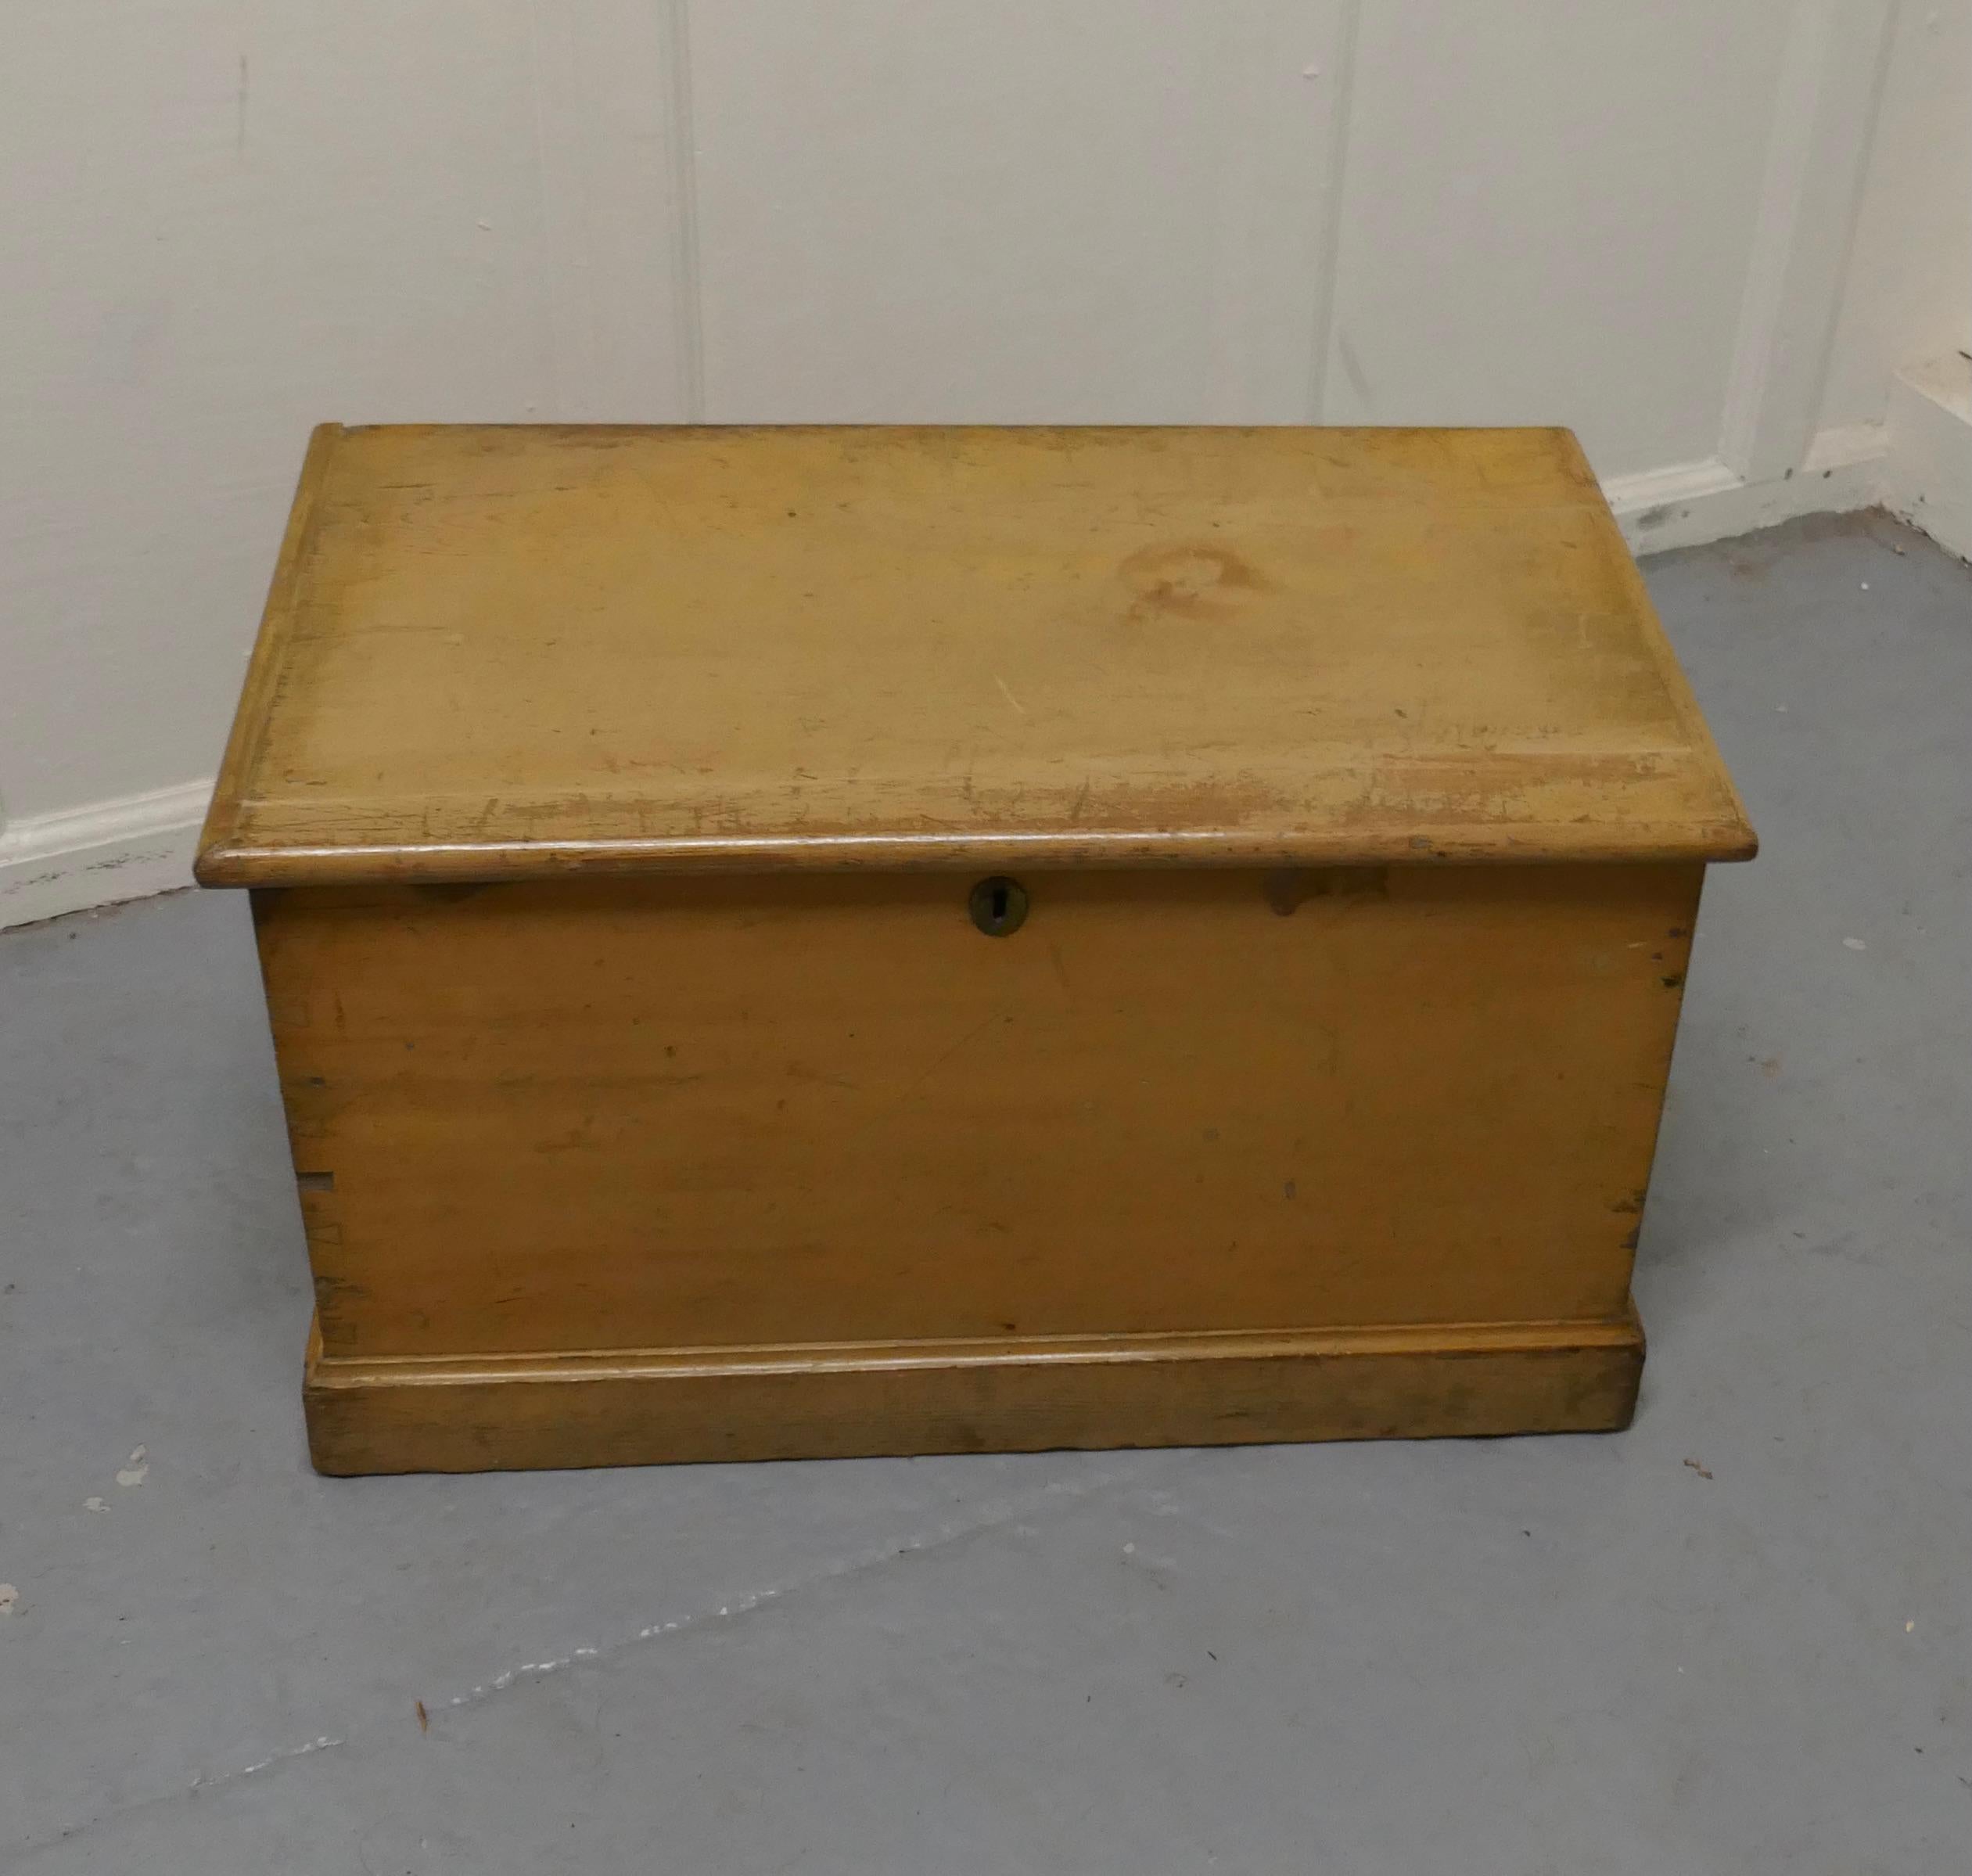 Victorian original shabby painted pine blanket box

This is an attractive solid pine box, it comes in its original paint which though shabby is a very attractive stone yellow which has waxed finish

This is very good quality pine, it is sound